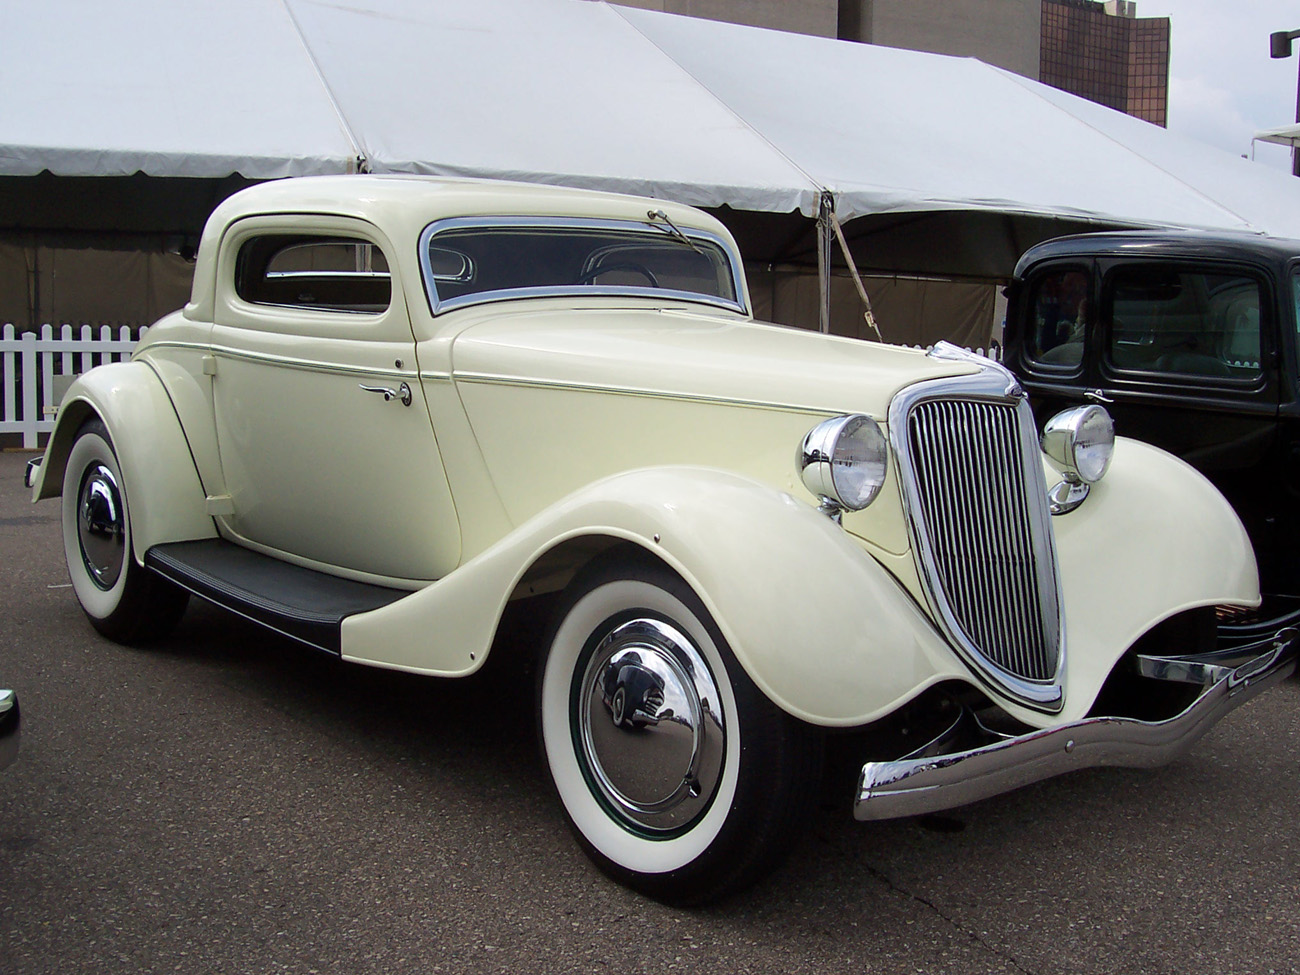 Bill Couch’s ’34 Coupe